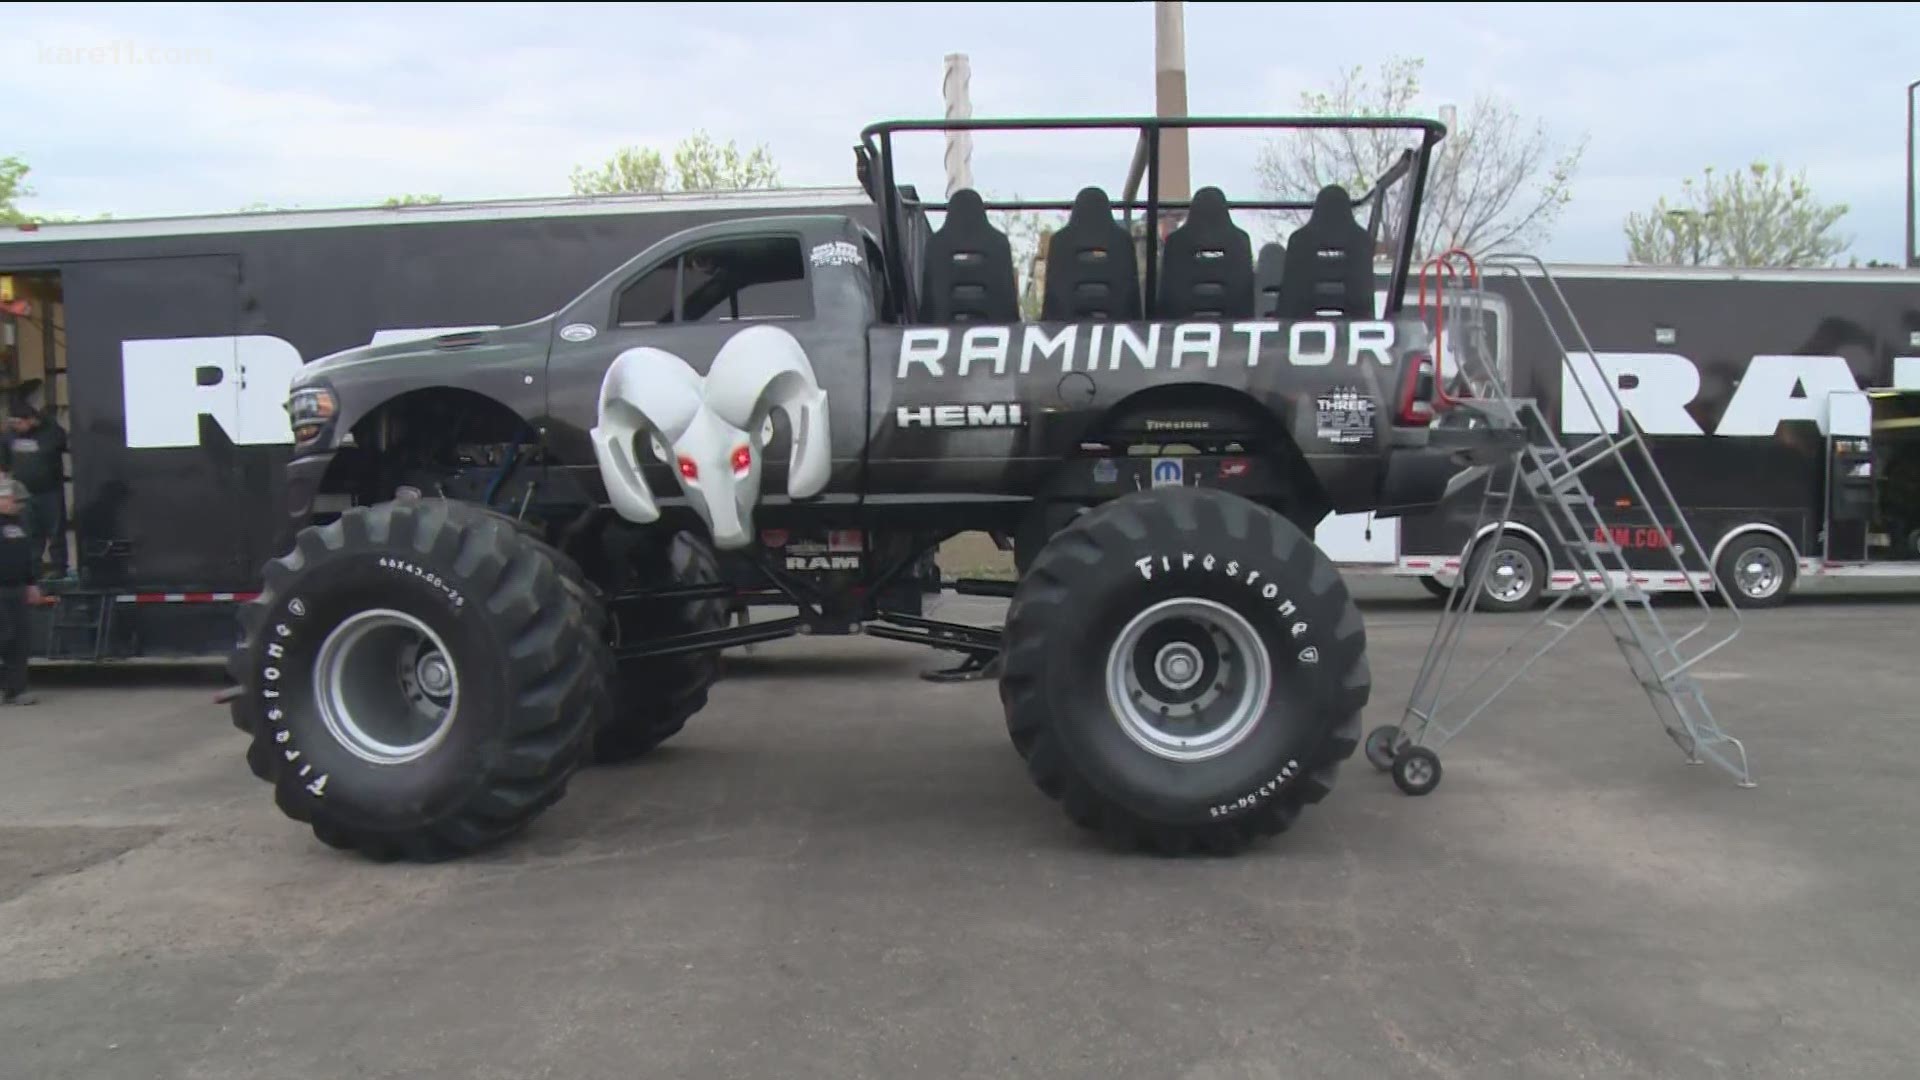 "The Raminator" will be giving rides and crushing cars out at the State Fairgrounds